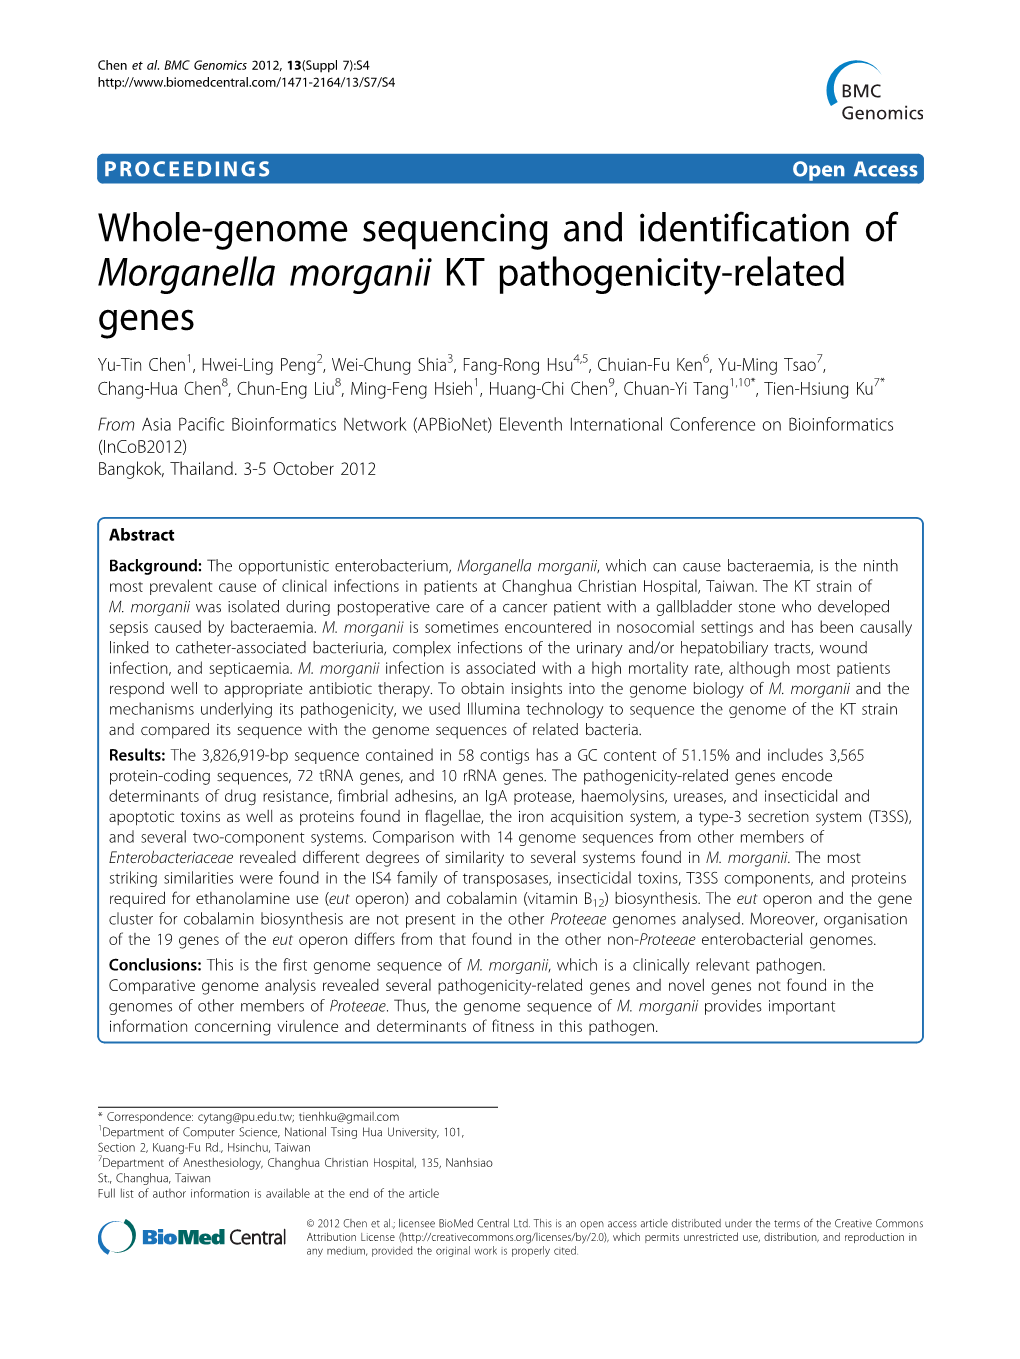 Whole-Genome Sequencing and Identification of Morganella